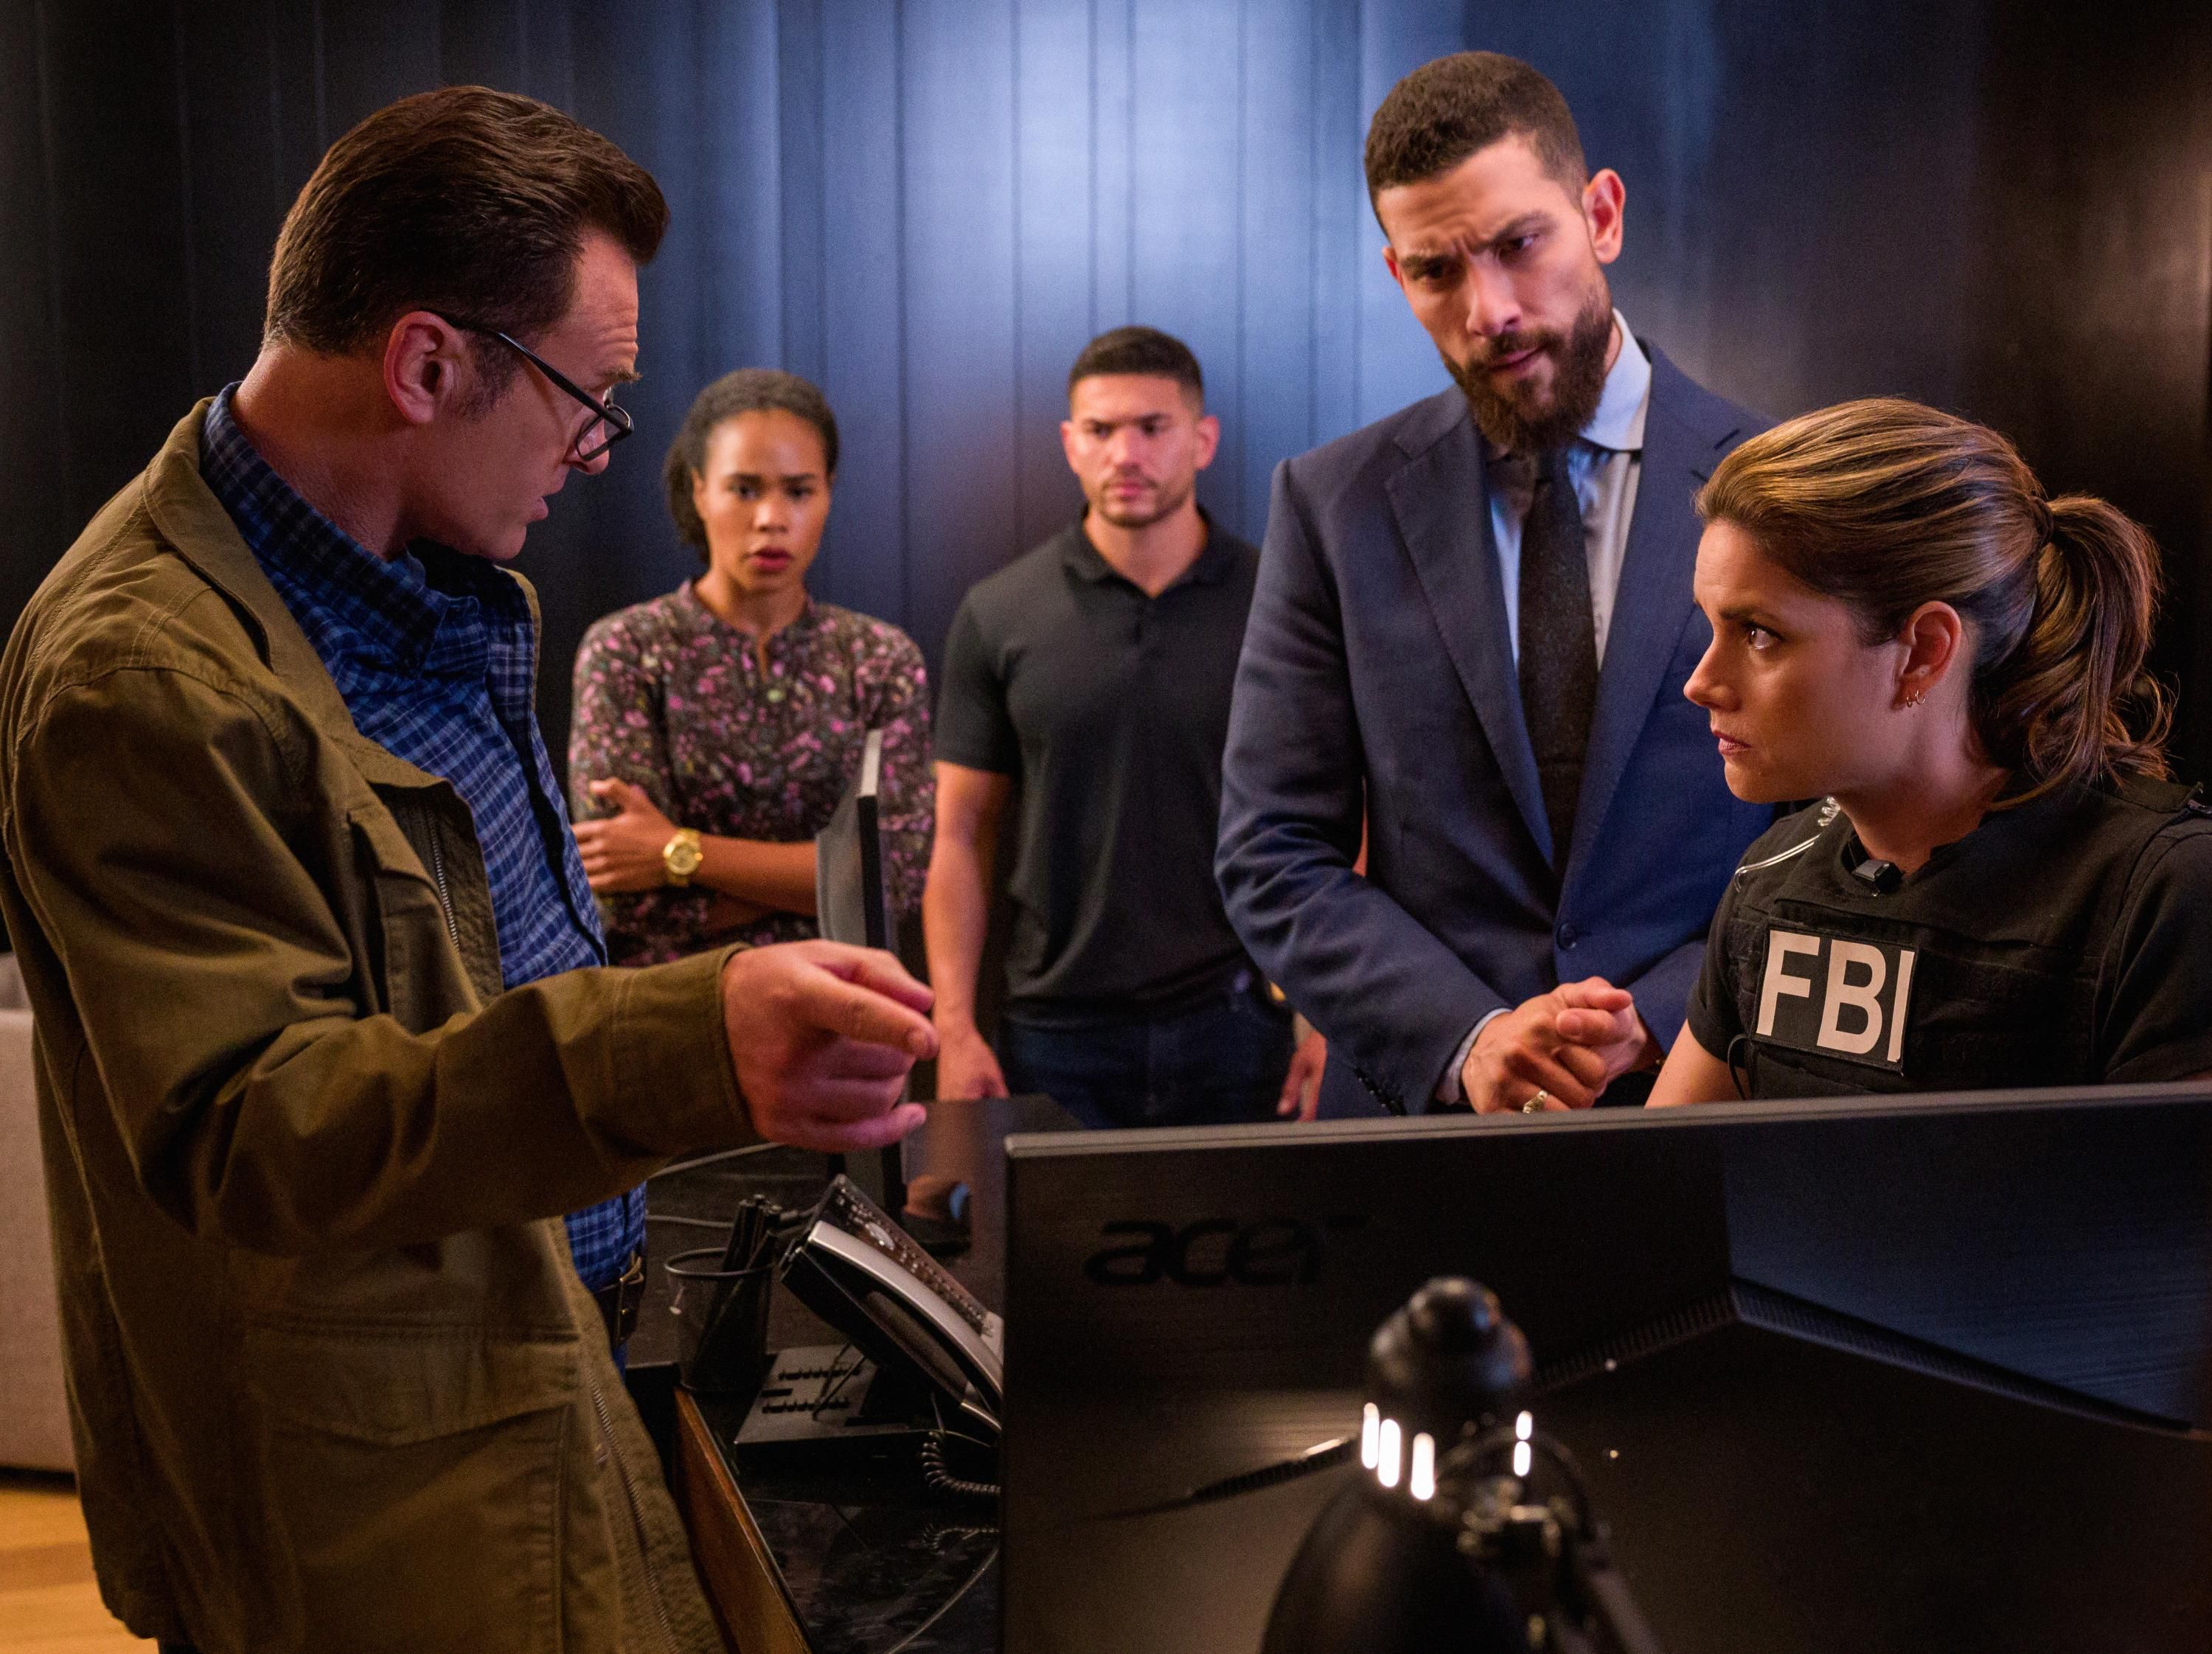 The casts of FBI and FBI: Most Wanted during a crossover event